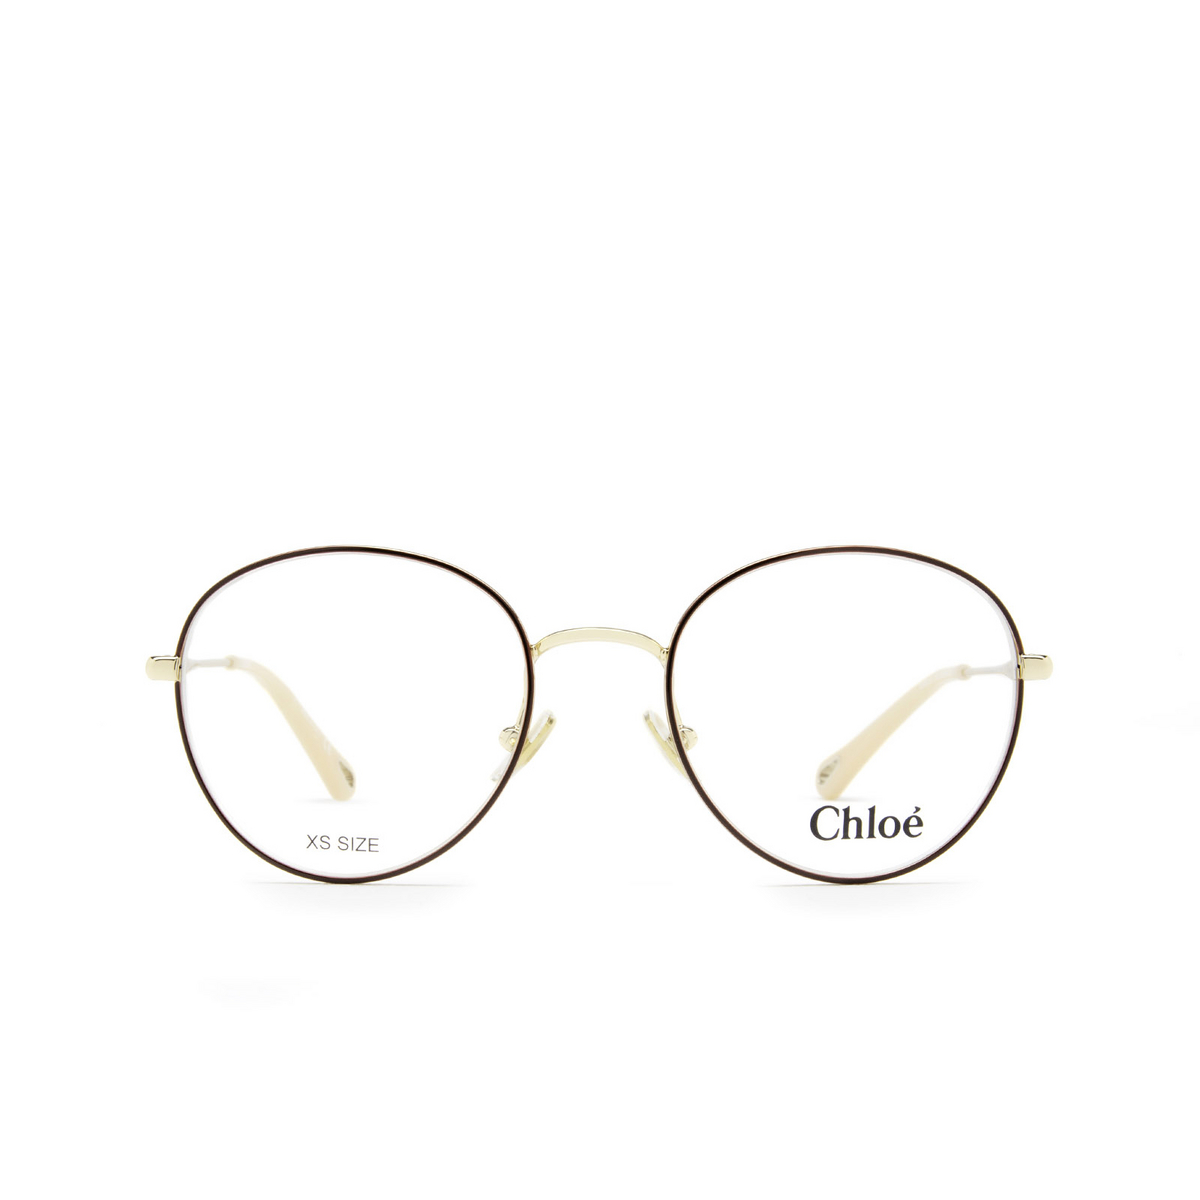 Chloé® Round Eyeglasses: CH0021O color Gold & Burgundy 010 - front view.